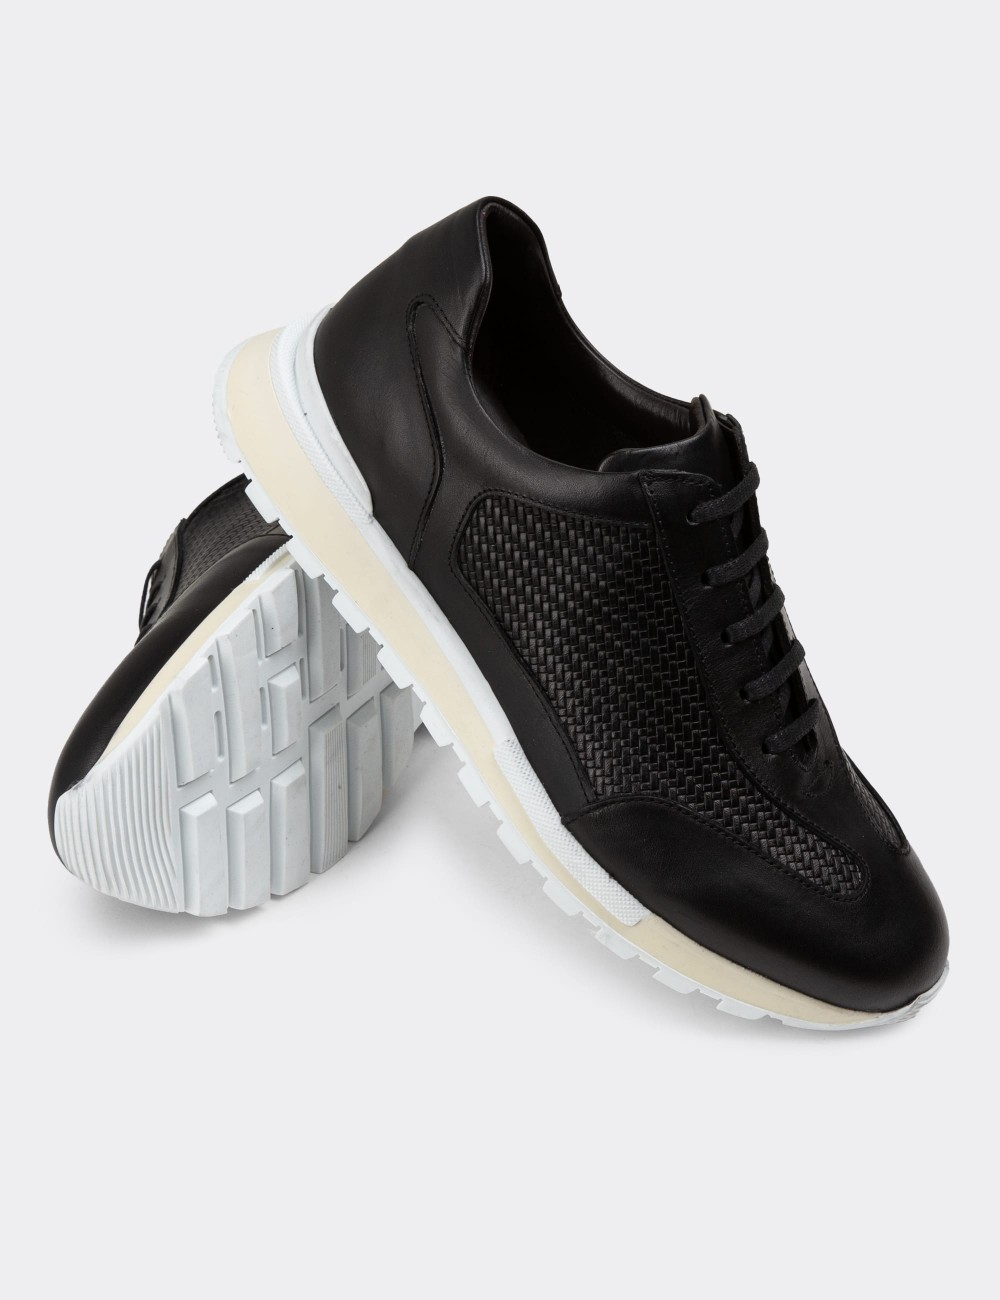 Black Leather Sneakers - 01729MSYHT03